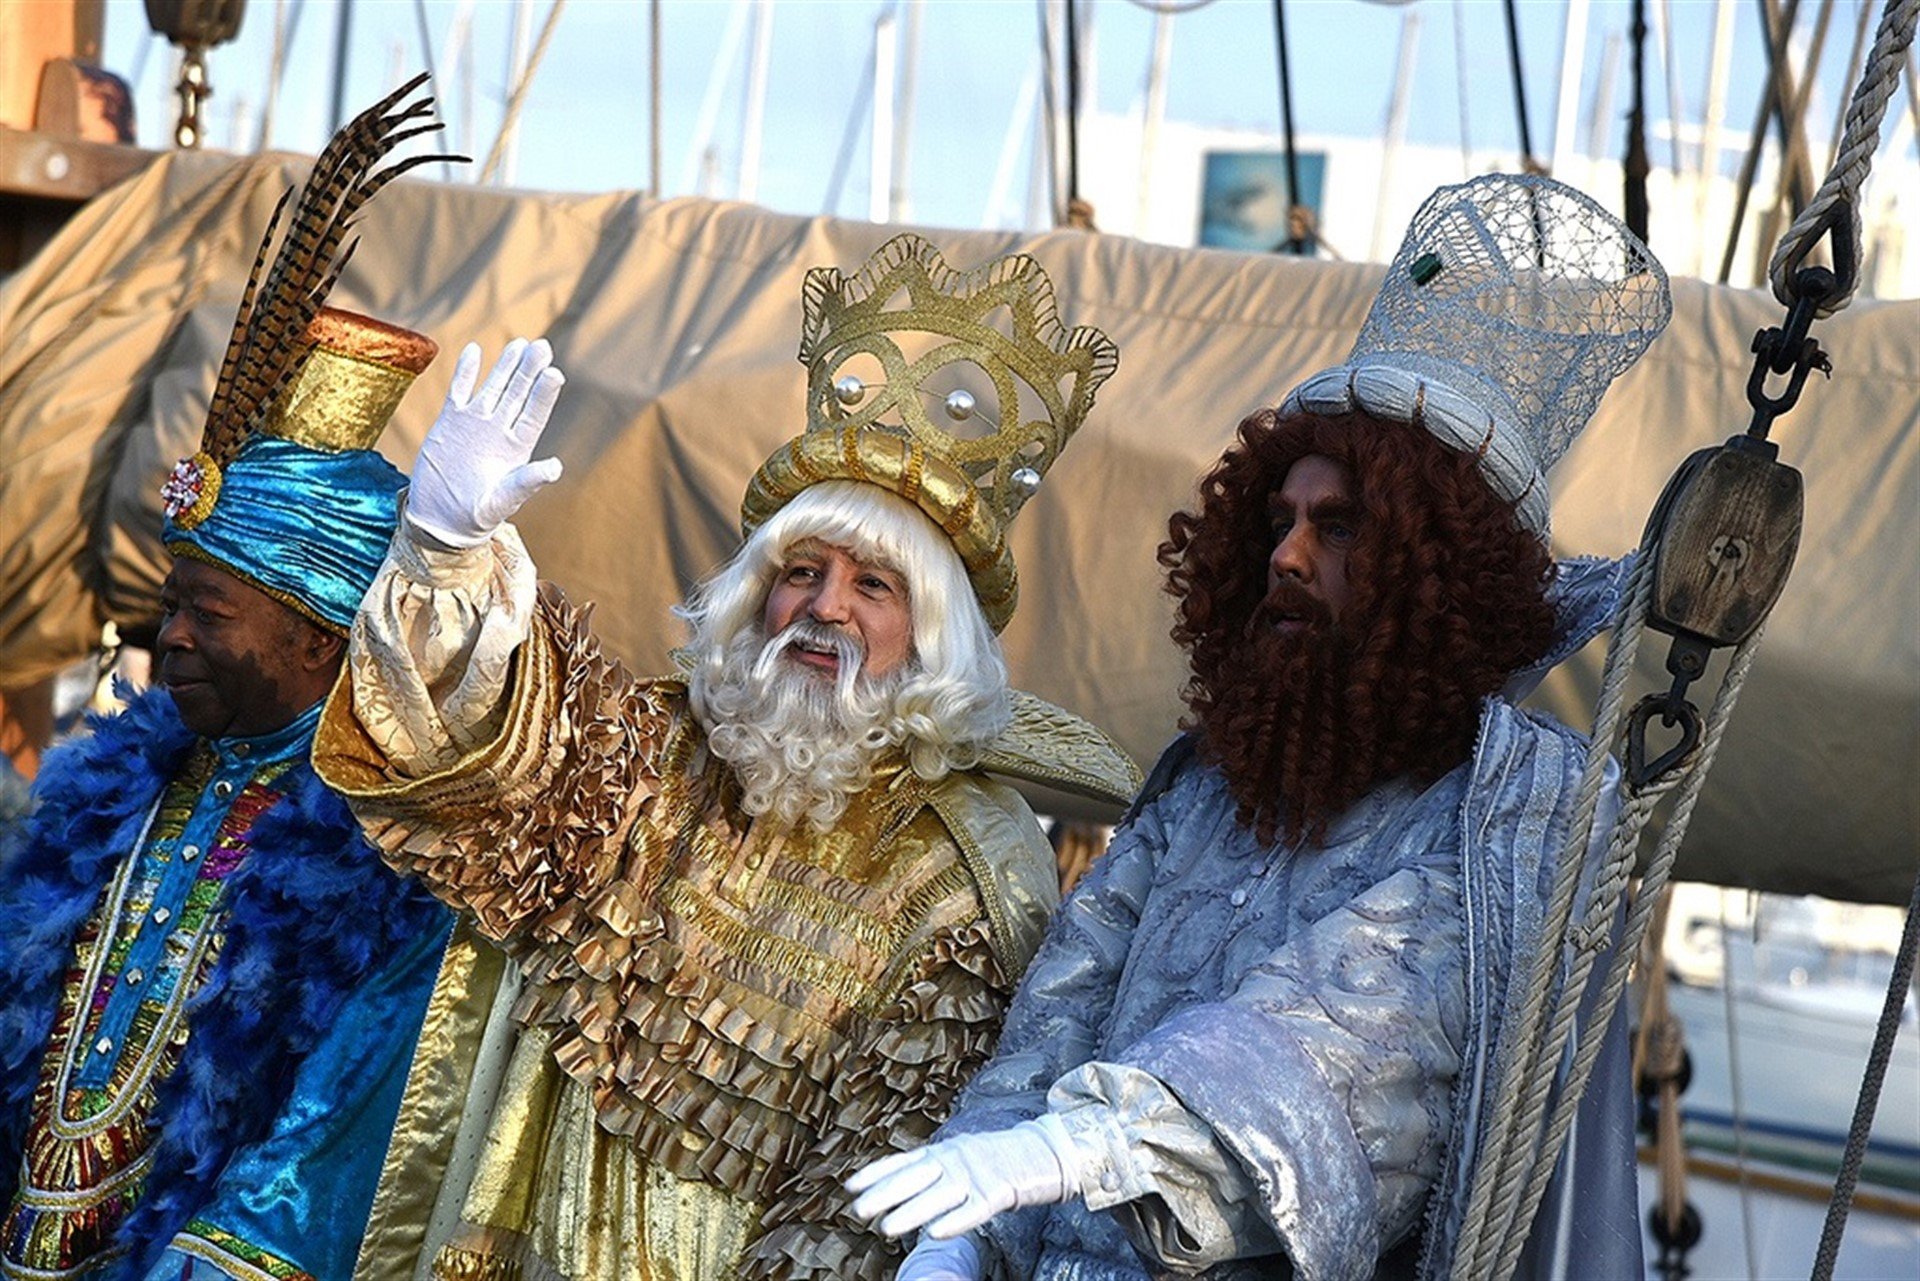 The 3 Kings can come, despite Covid: January 5th parades in Catalonia to go ahead